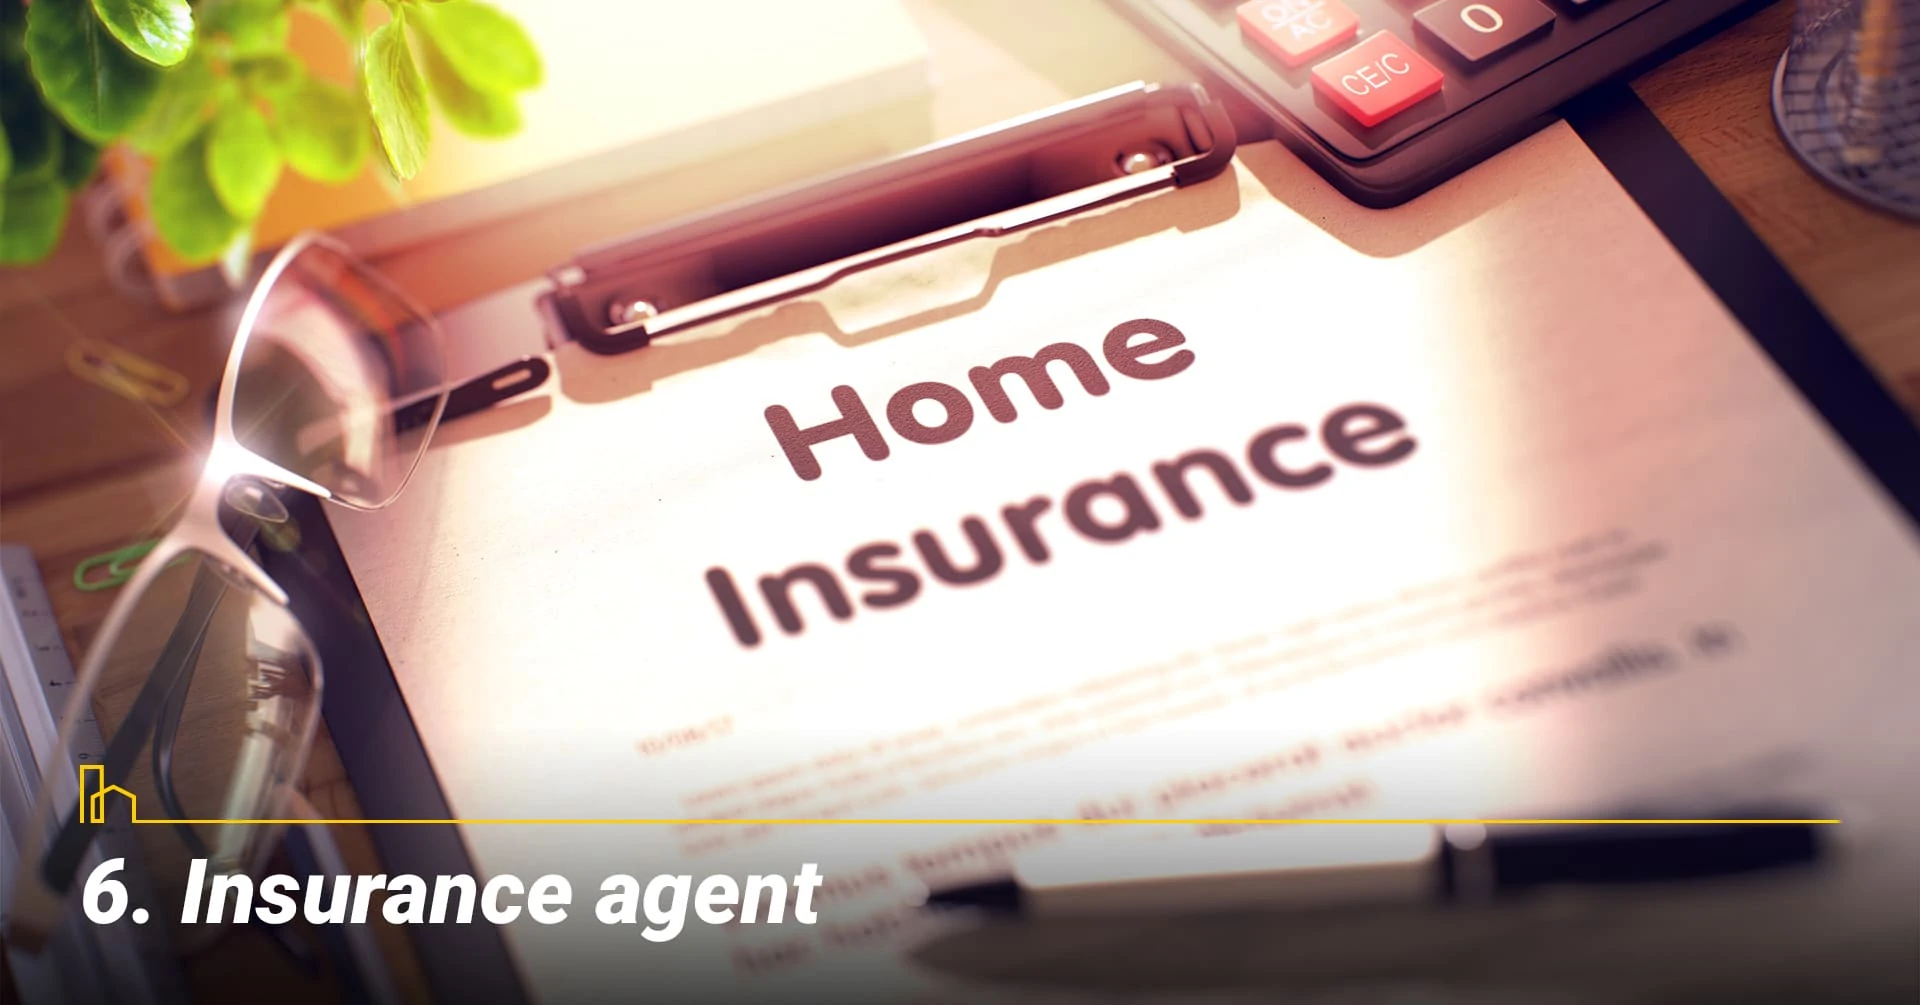 Insurance agent, talk with an insurance agent about your need